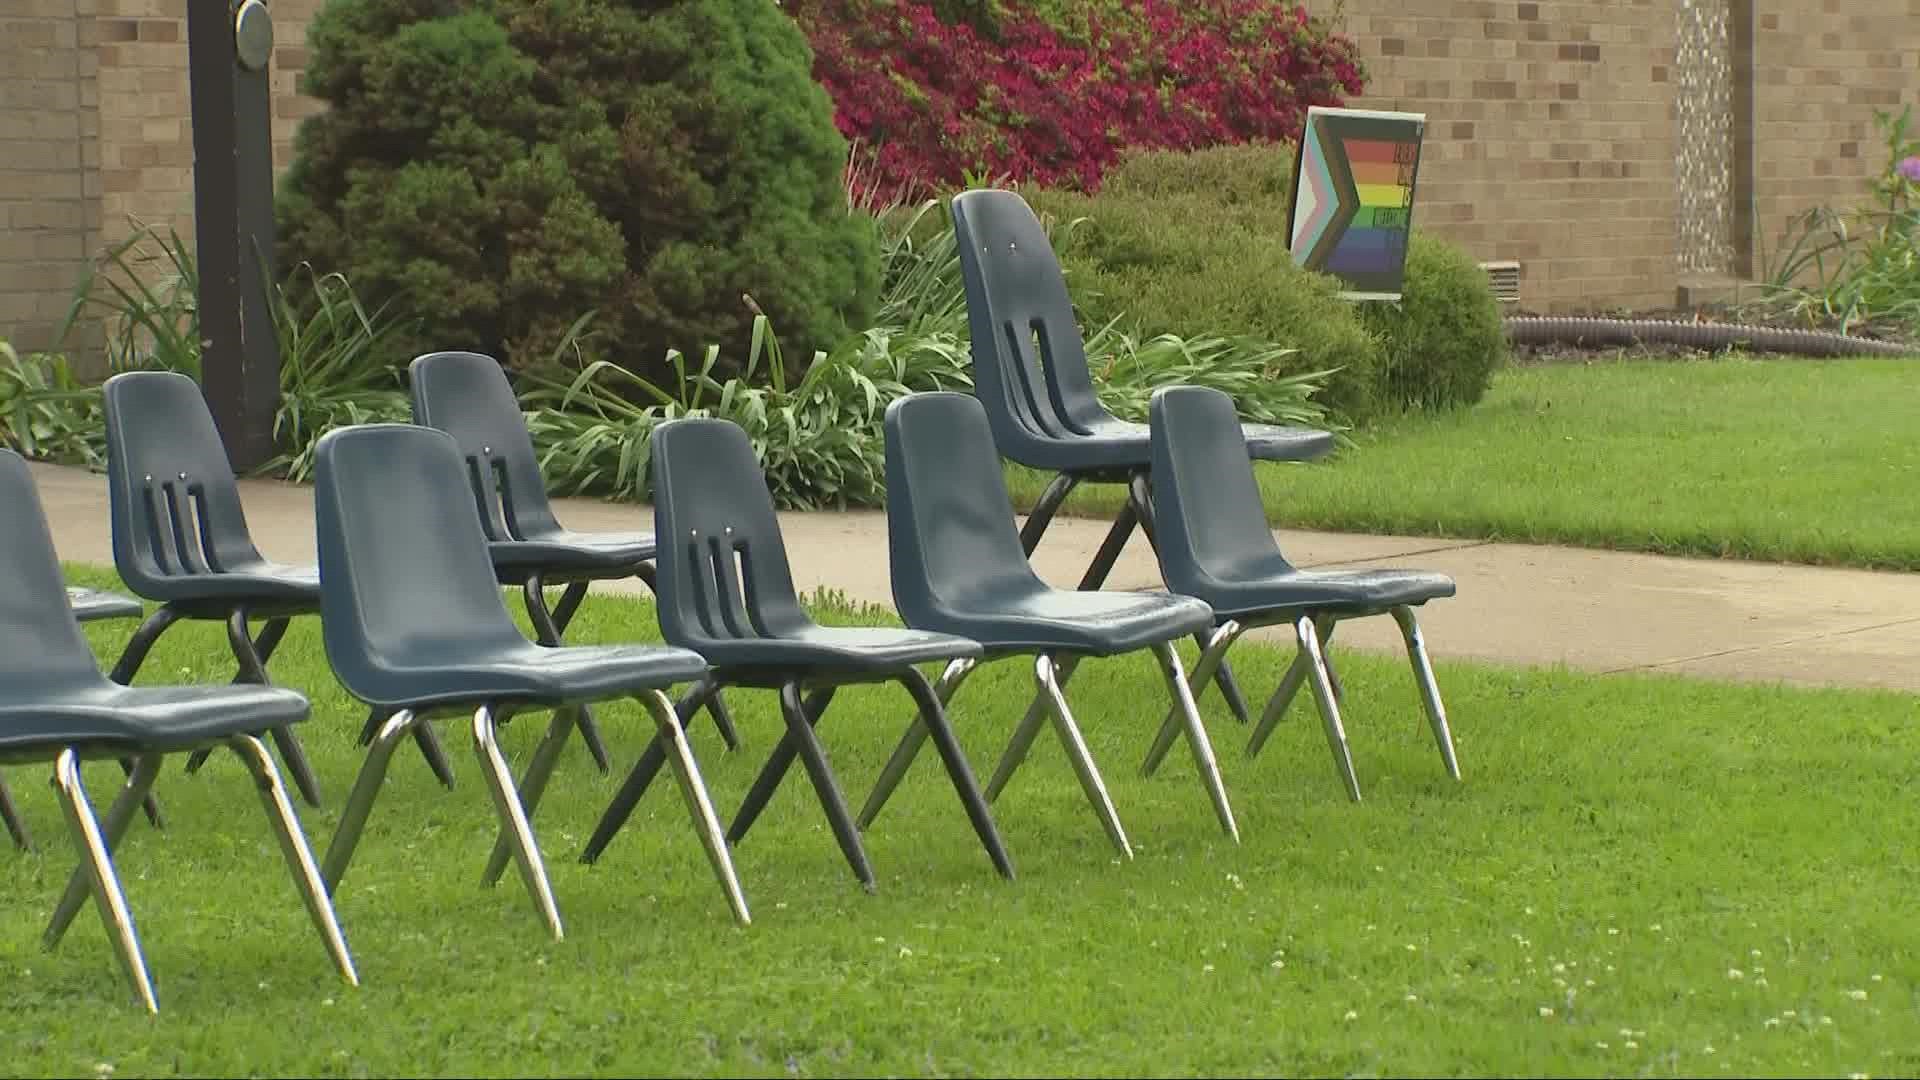 United Methodist Church of Macedonia on Aurora Road has displayed 21 chairs for the victims of the shooting in Uvalde, Texas.